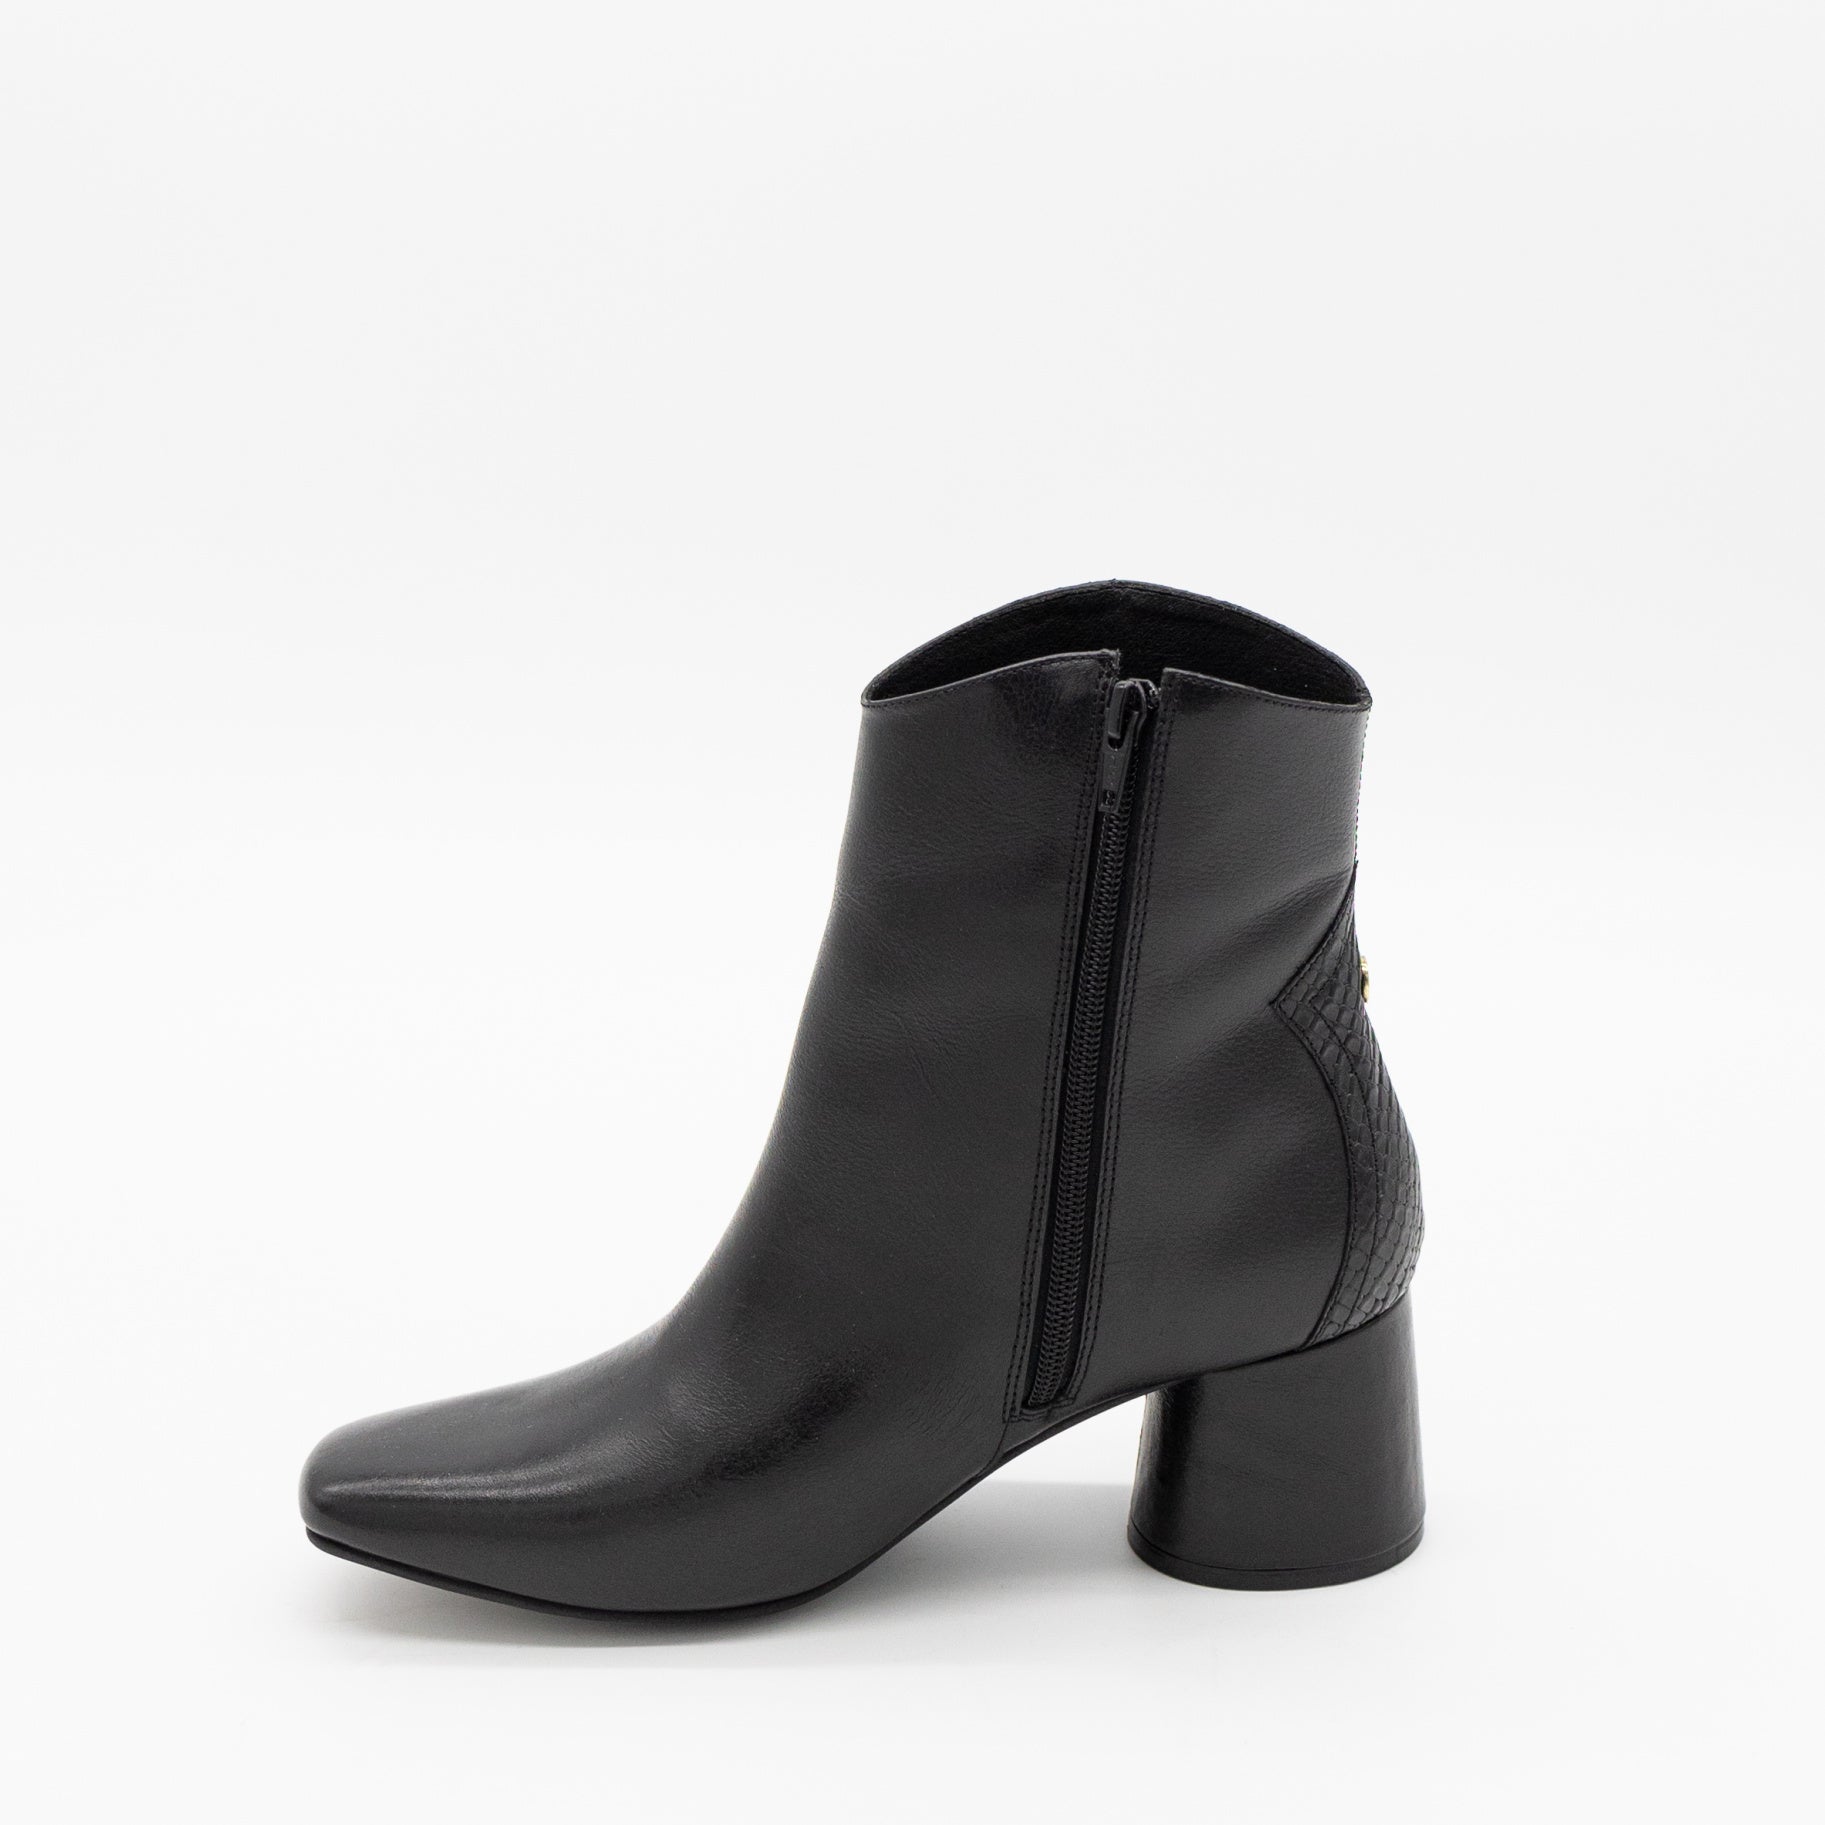 Handcrafted Leather Boots, Black Smooth Leather and Embossed Leather Boot With Heel. Stivali New York